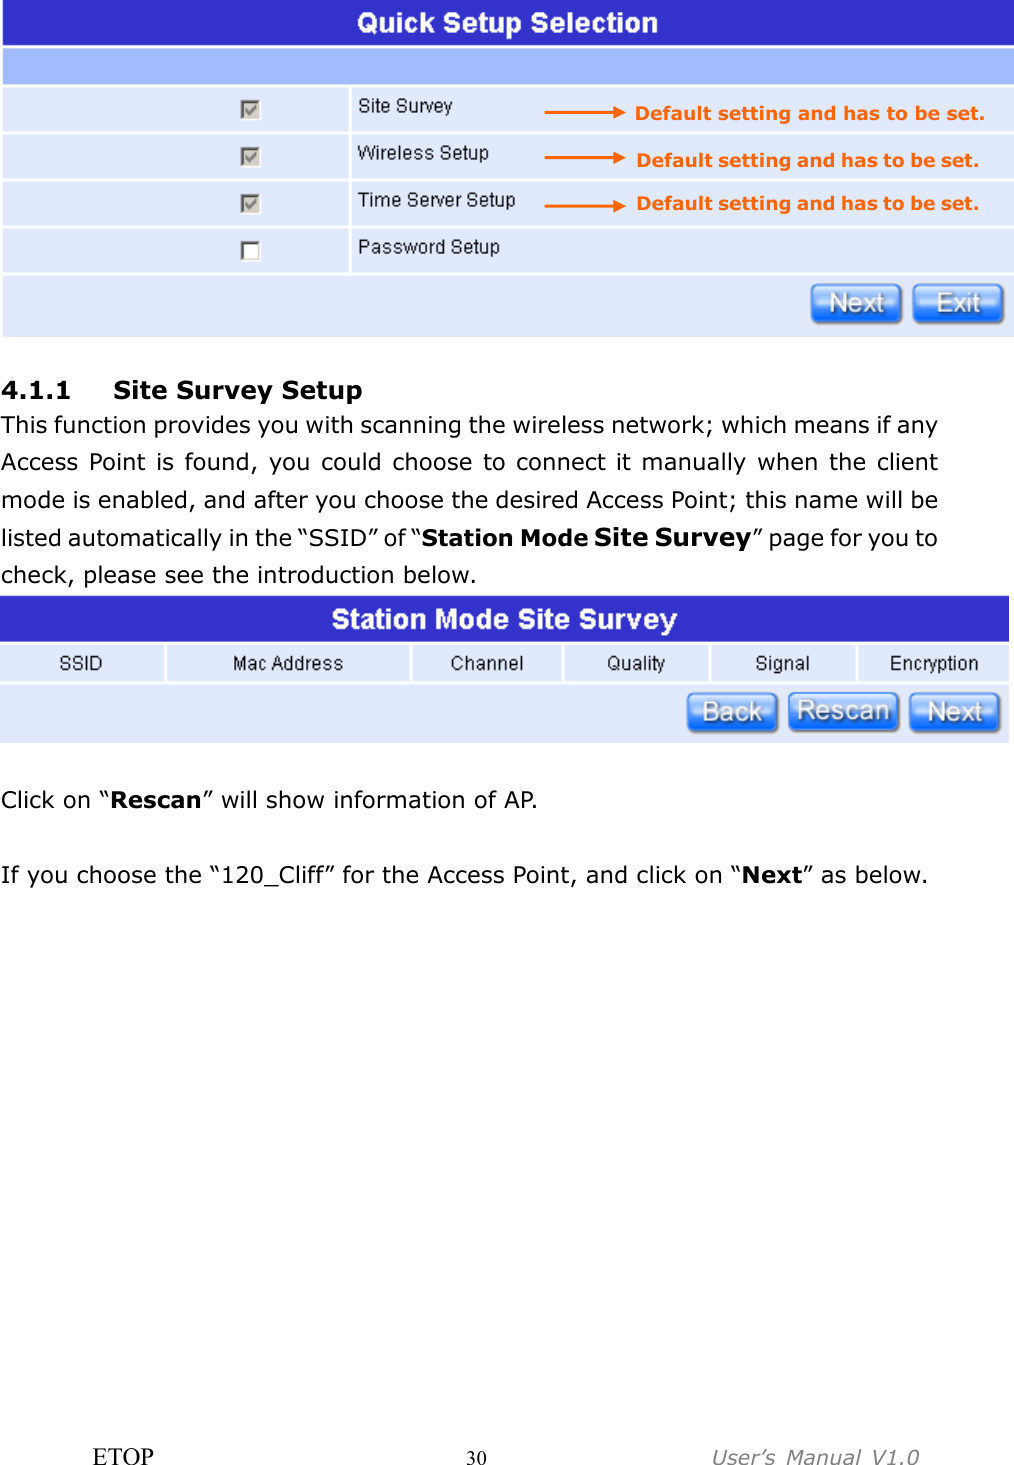 ETOP                         30                  User’s  Manual  V1.0    4.1.1 Site Survey Setup This function provides you with scanning the wireless network; which means if any Access Point is found,  you could choose to connect it manually when the client mode is enabled, and after you choose the desired Access Point; this name will be listed automatically in the “SSID” of “Station Mode Site Survey” page for you to check, please see the introduction below.   Click on “Rescan” will show information of AP.  If you choose the “120_Cliff” for the Access Point, and click on “Next” as below. Default setting and has to be set. Default setting and has to be set. Default setting and has to be set. 